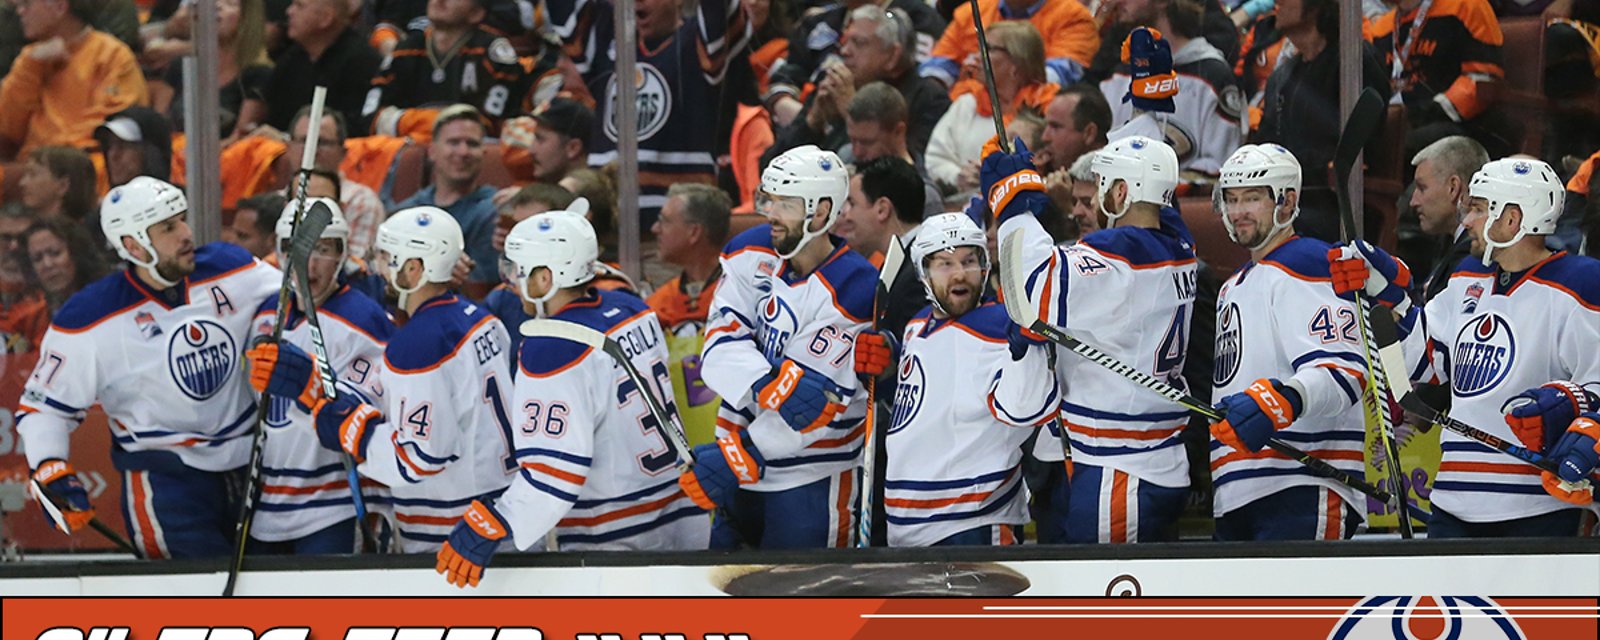 GOTTA SEE IT: Further proof that Oilers fans are the best in the NHL